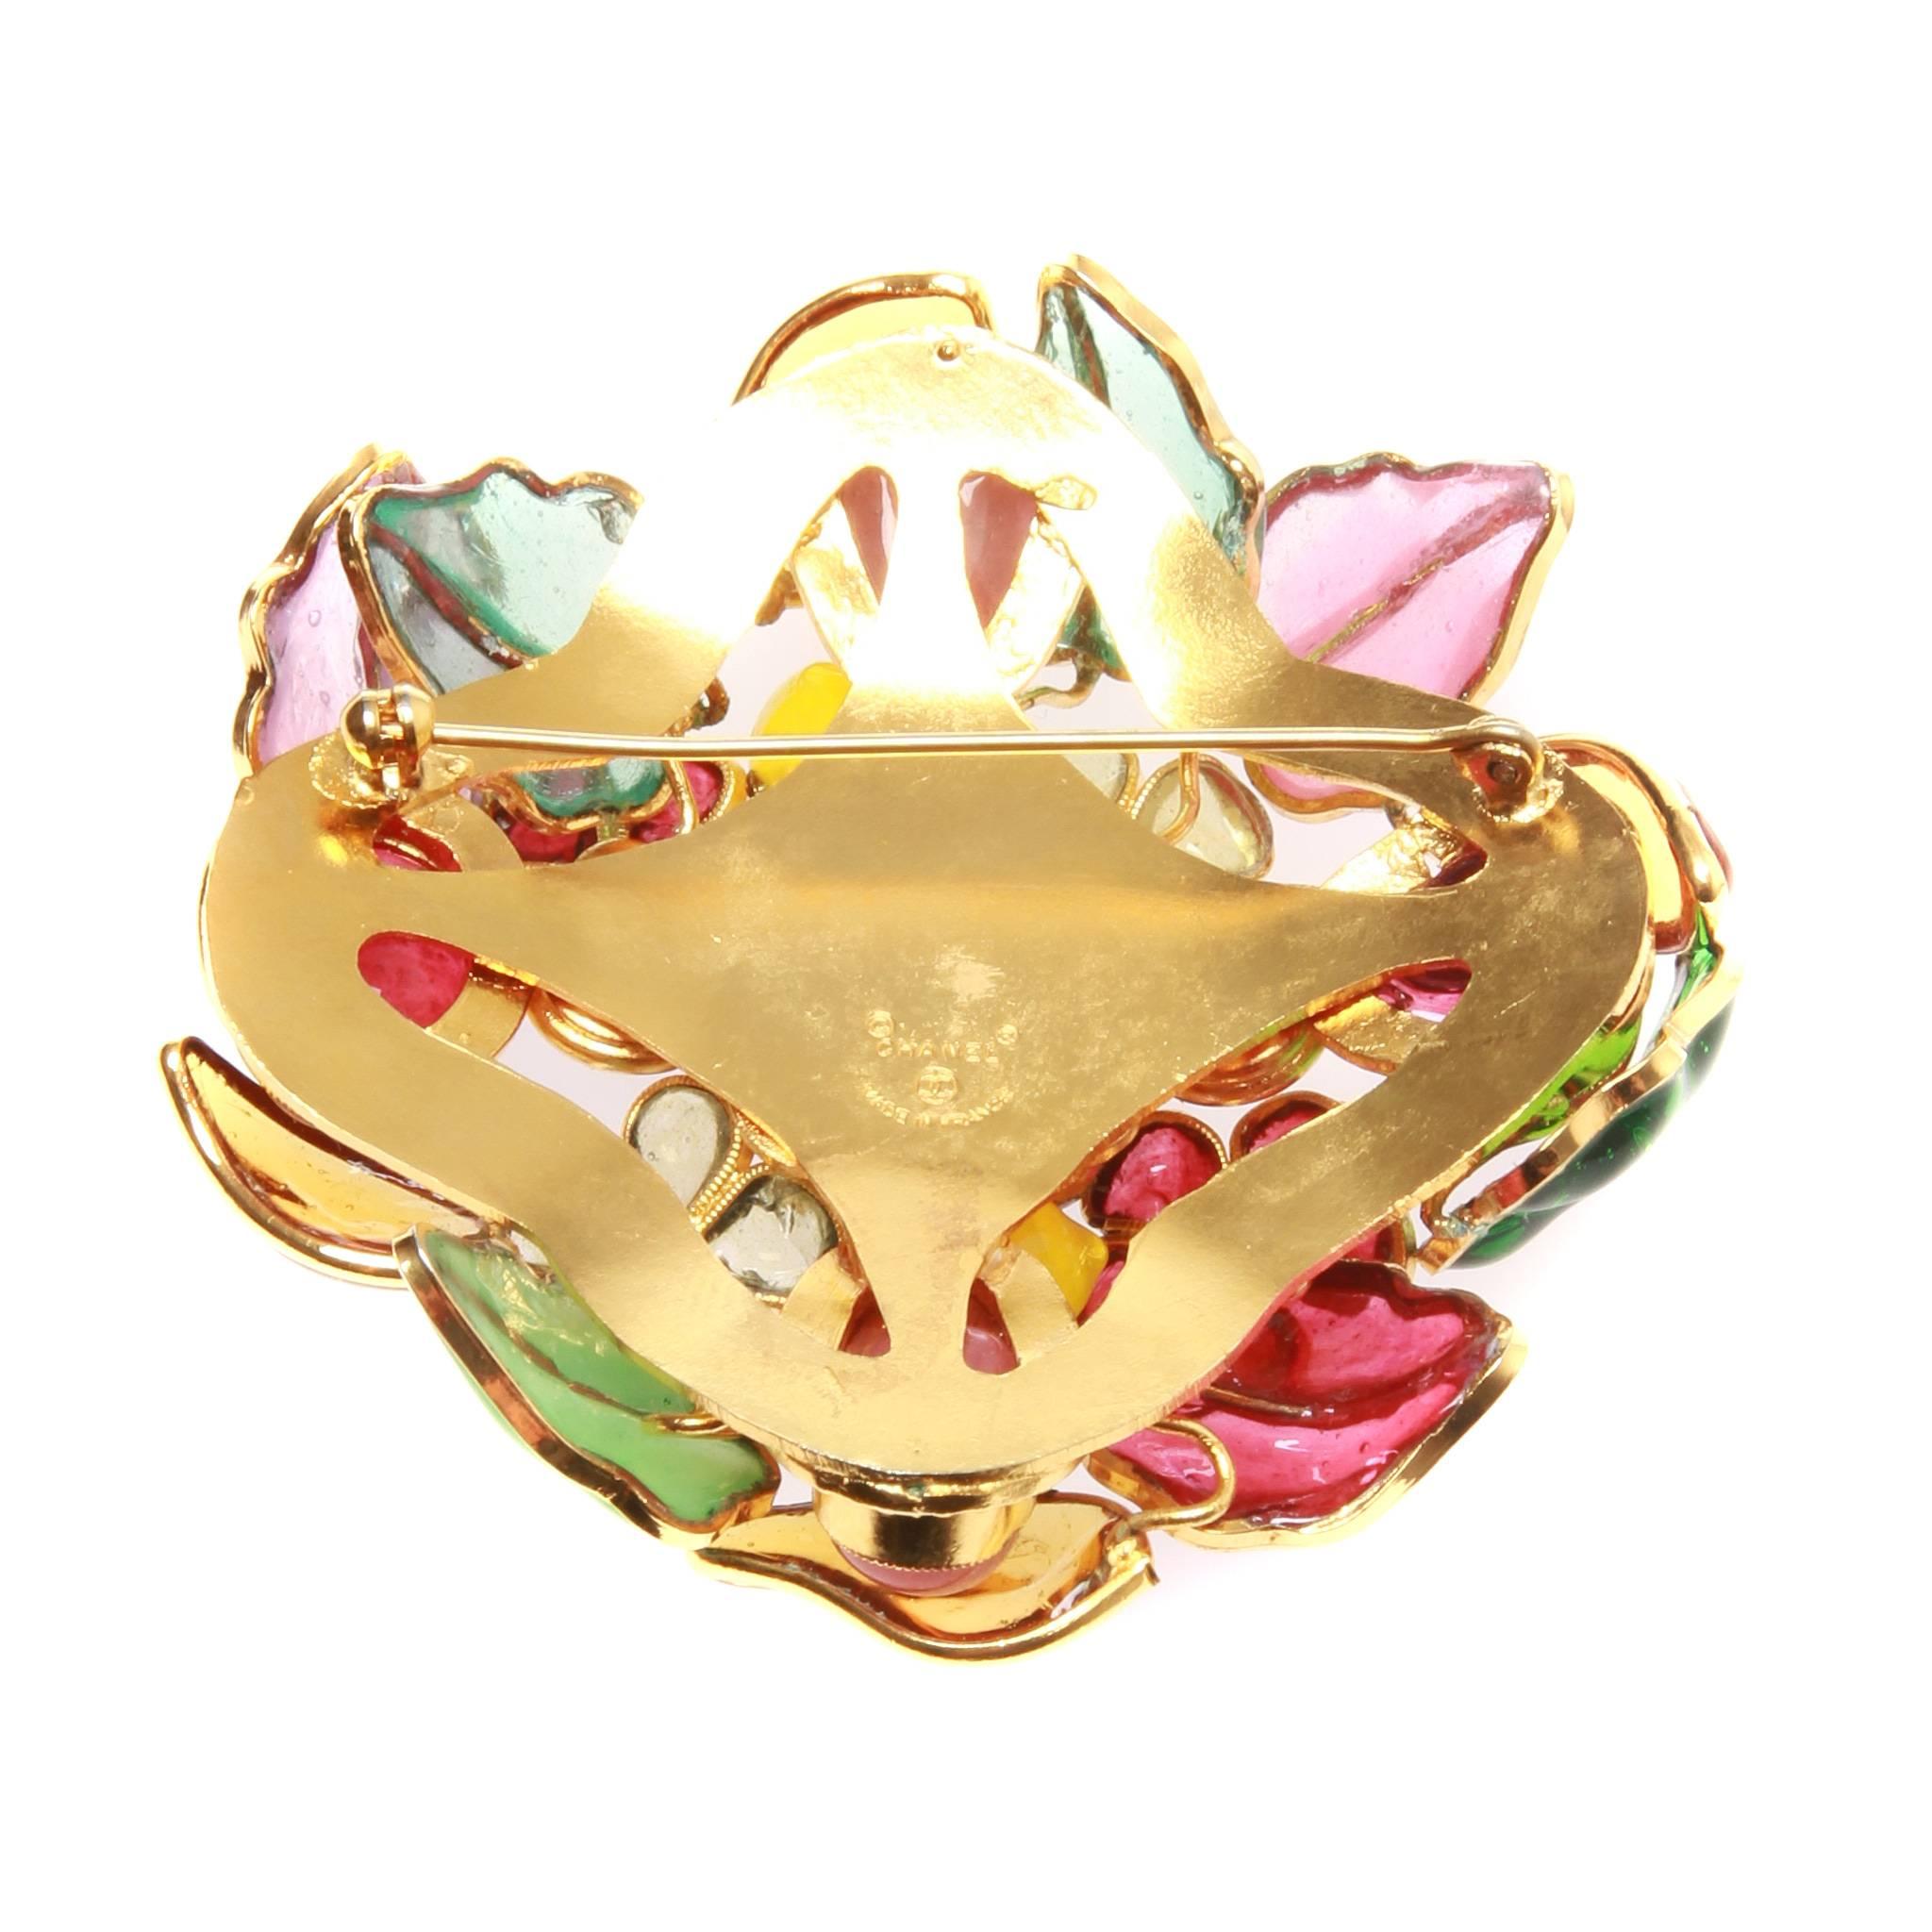 Vintage Chanel brooch formed of multi-coloured Gripoix glass in a floral design set in bright gold-tone mental. 

Roll needle at back. Chanel stamp dates it to the period of 1971-80.

With box